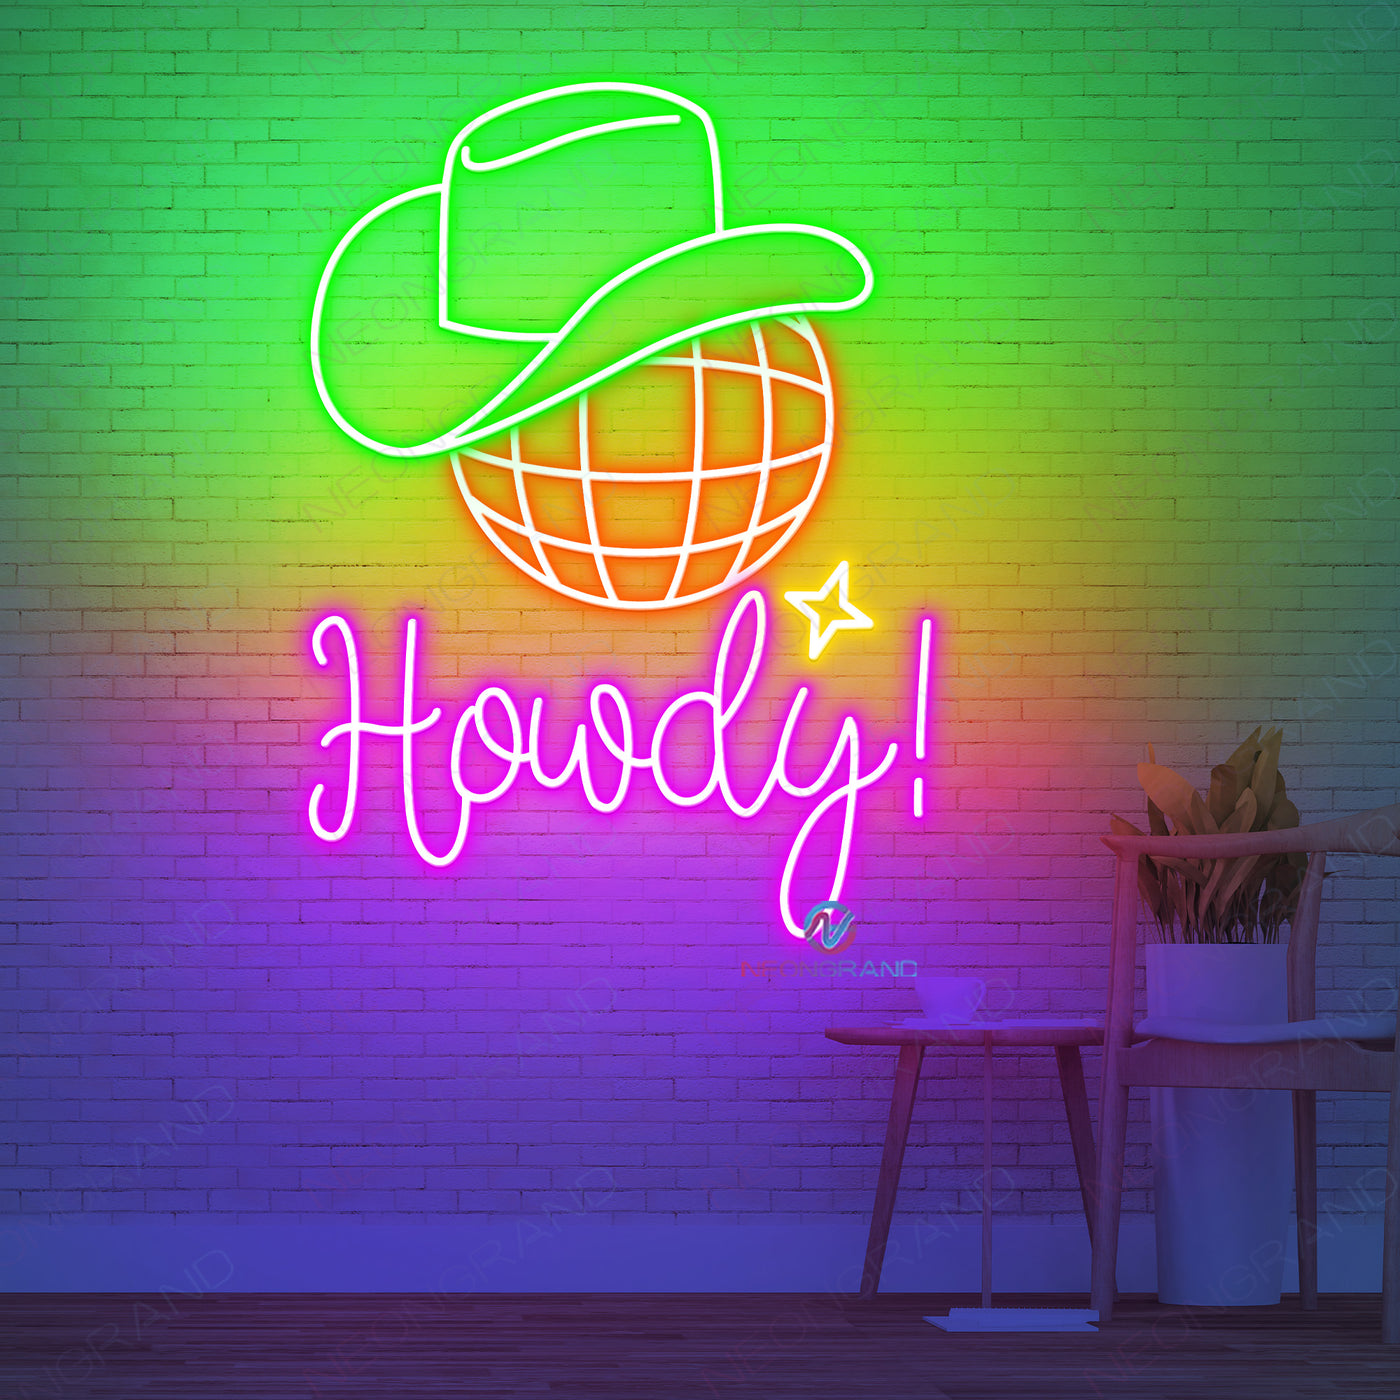 Neon Howdy Sign Man Cave Led Light